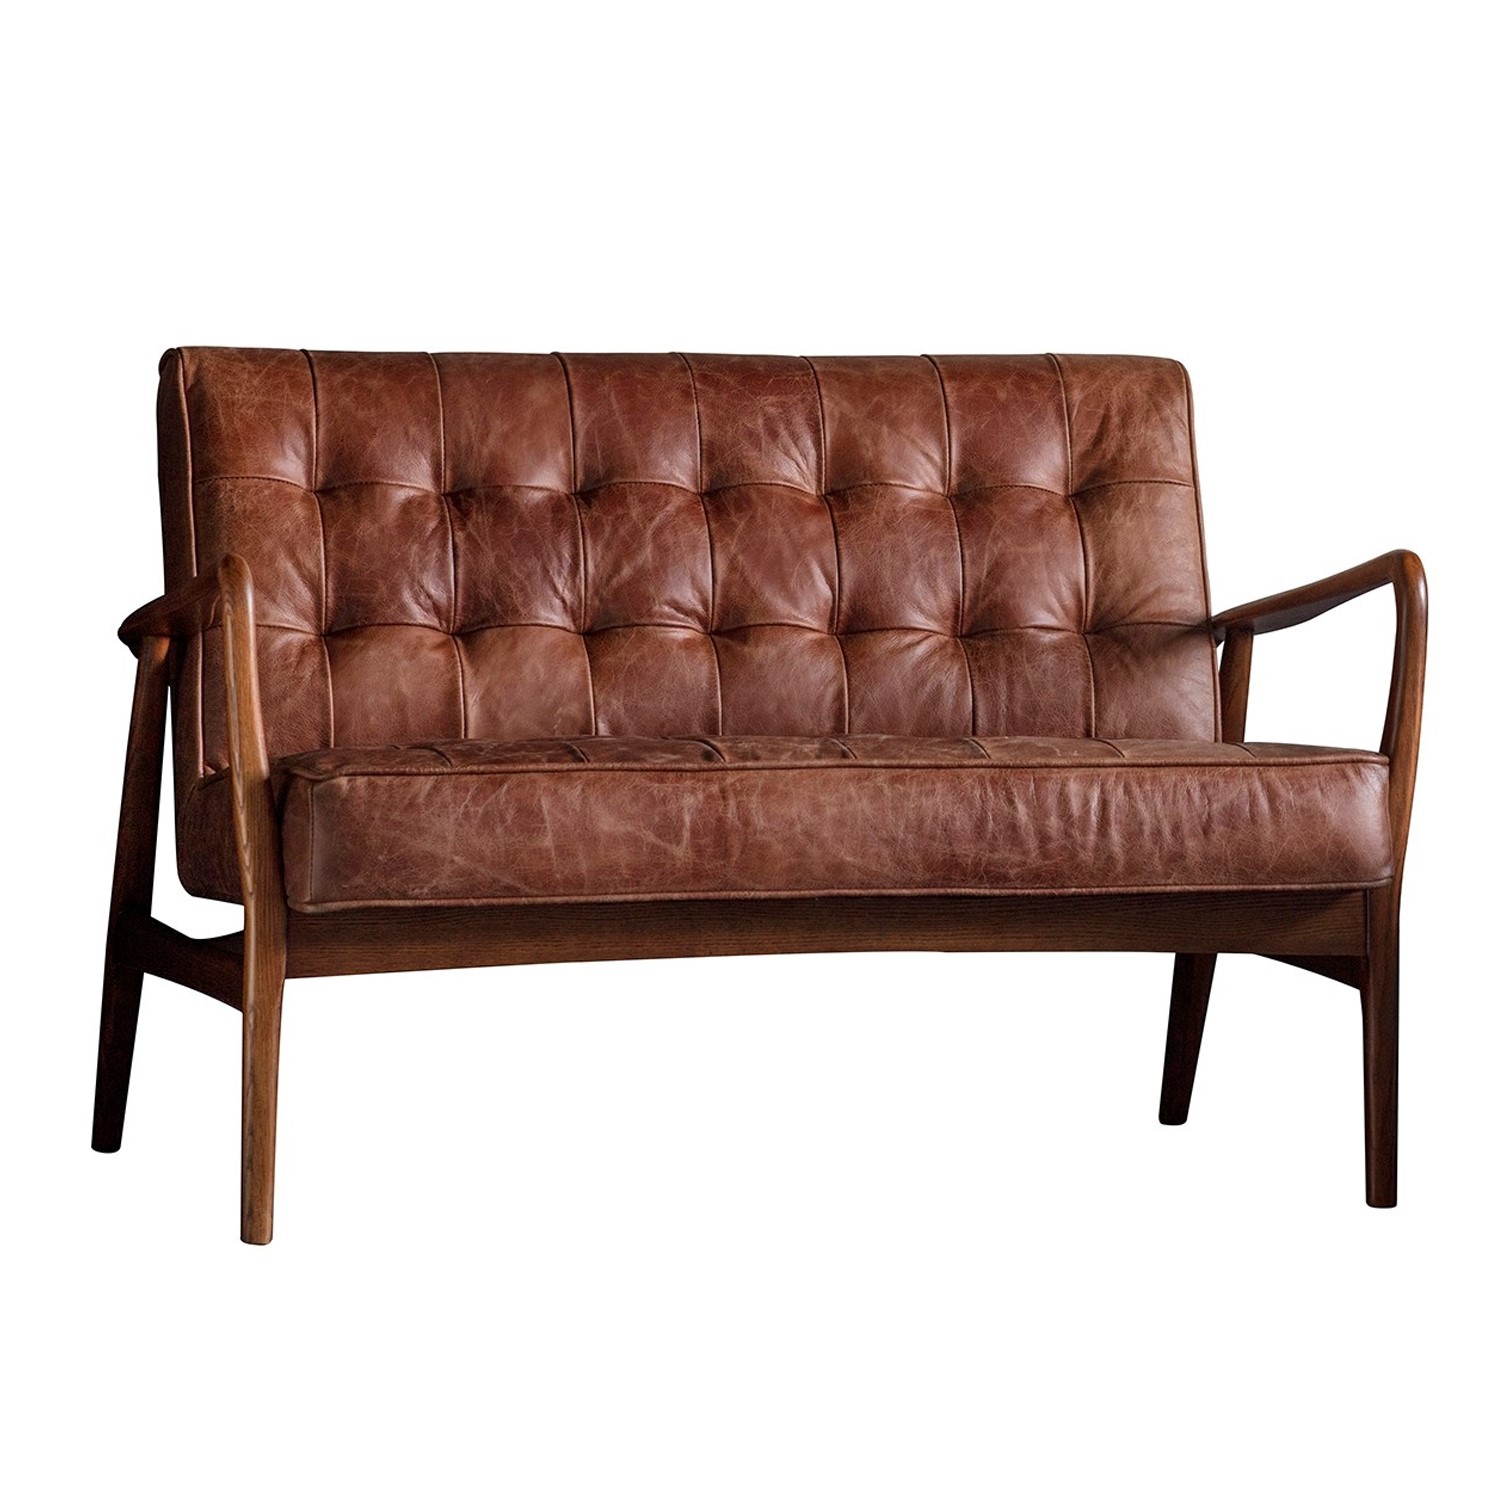 Read more about Brown leather 2 seater tufted sofa caspian house